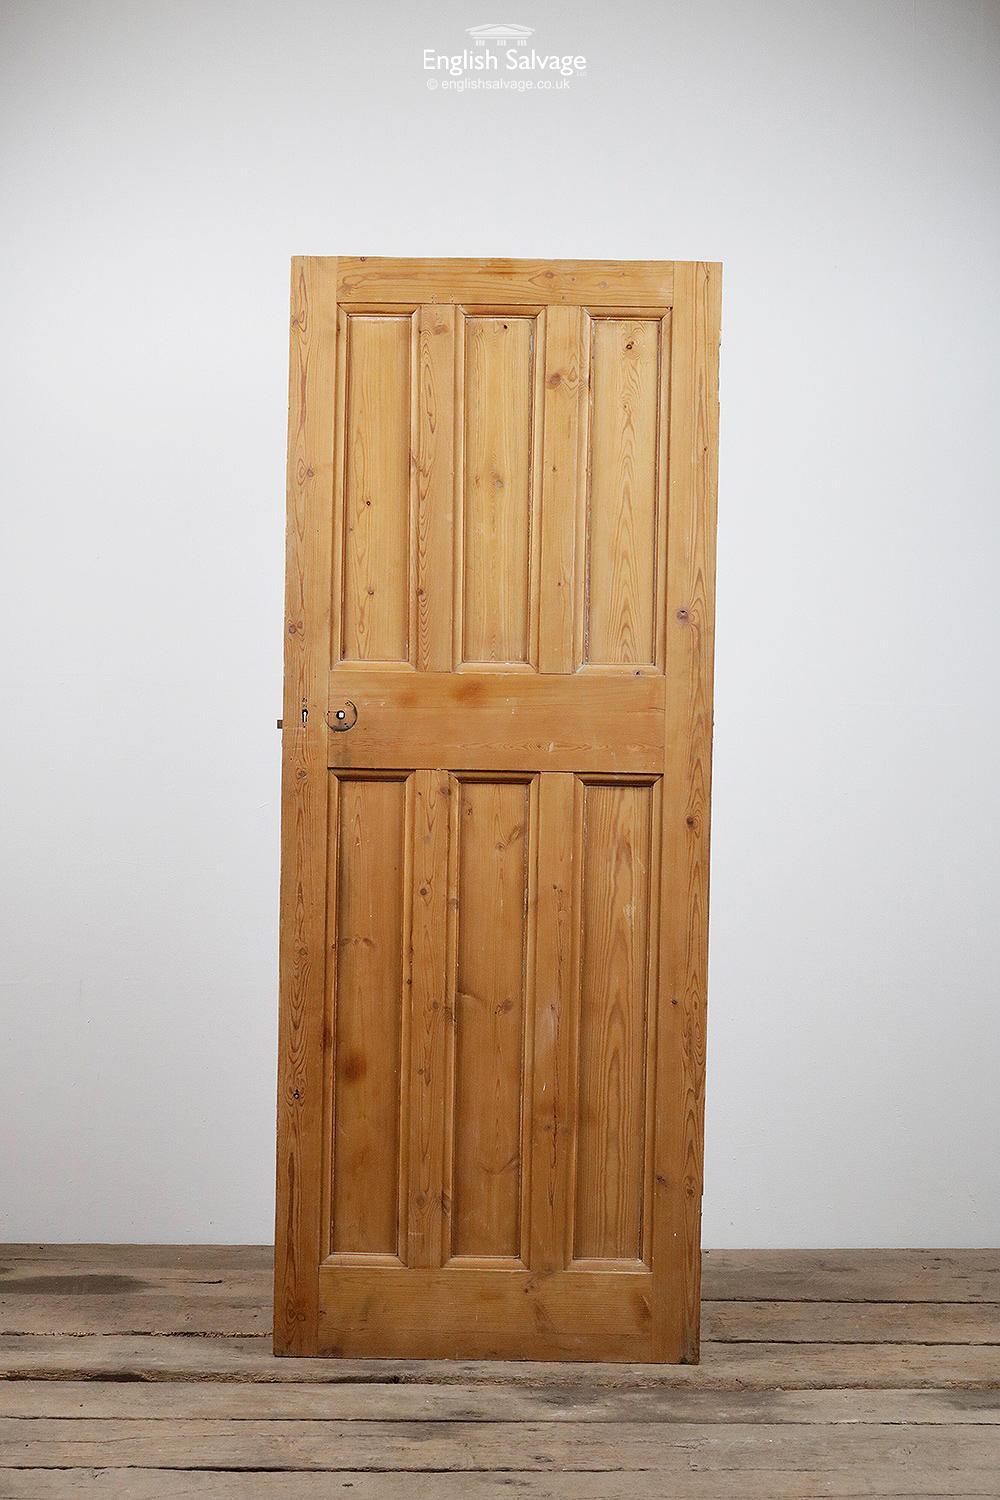 European Salvaged Stripped Pine 3 Over 3 Door, 20th Century For Sale